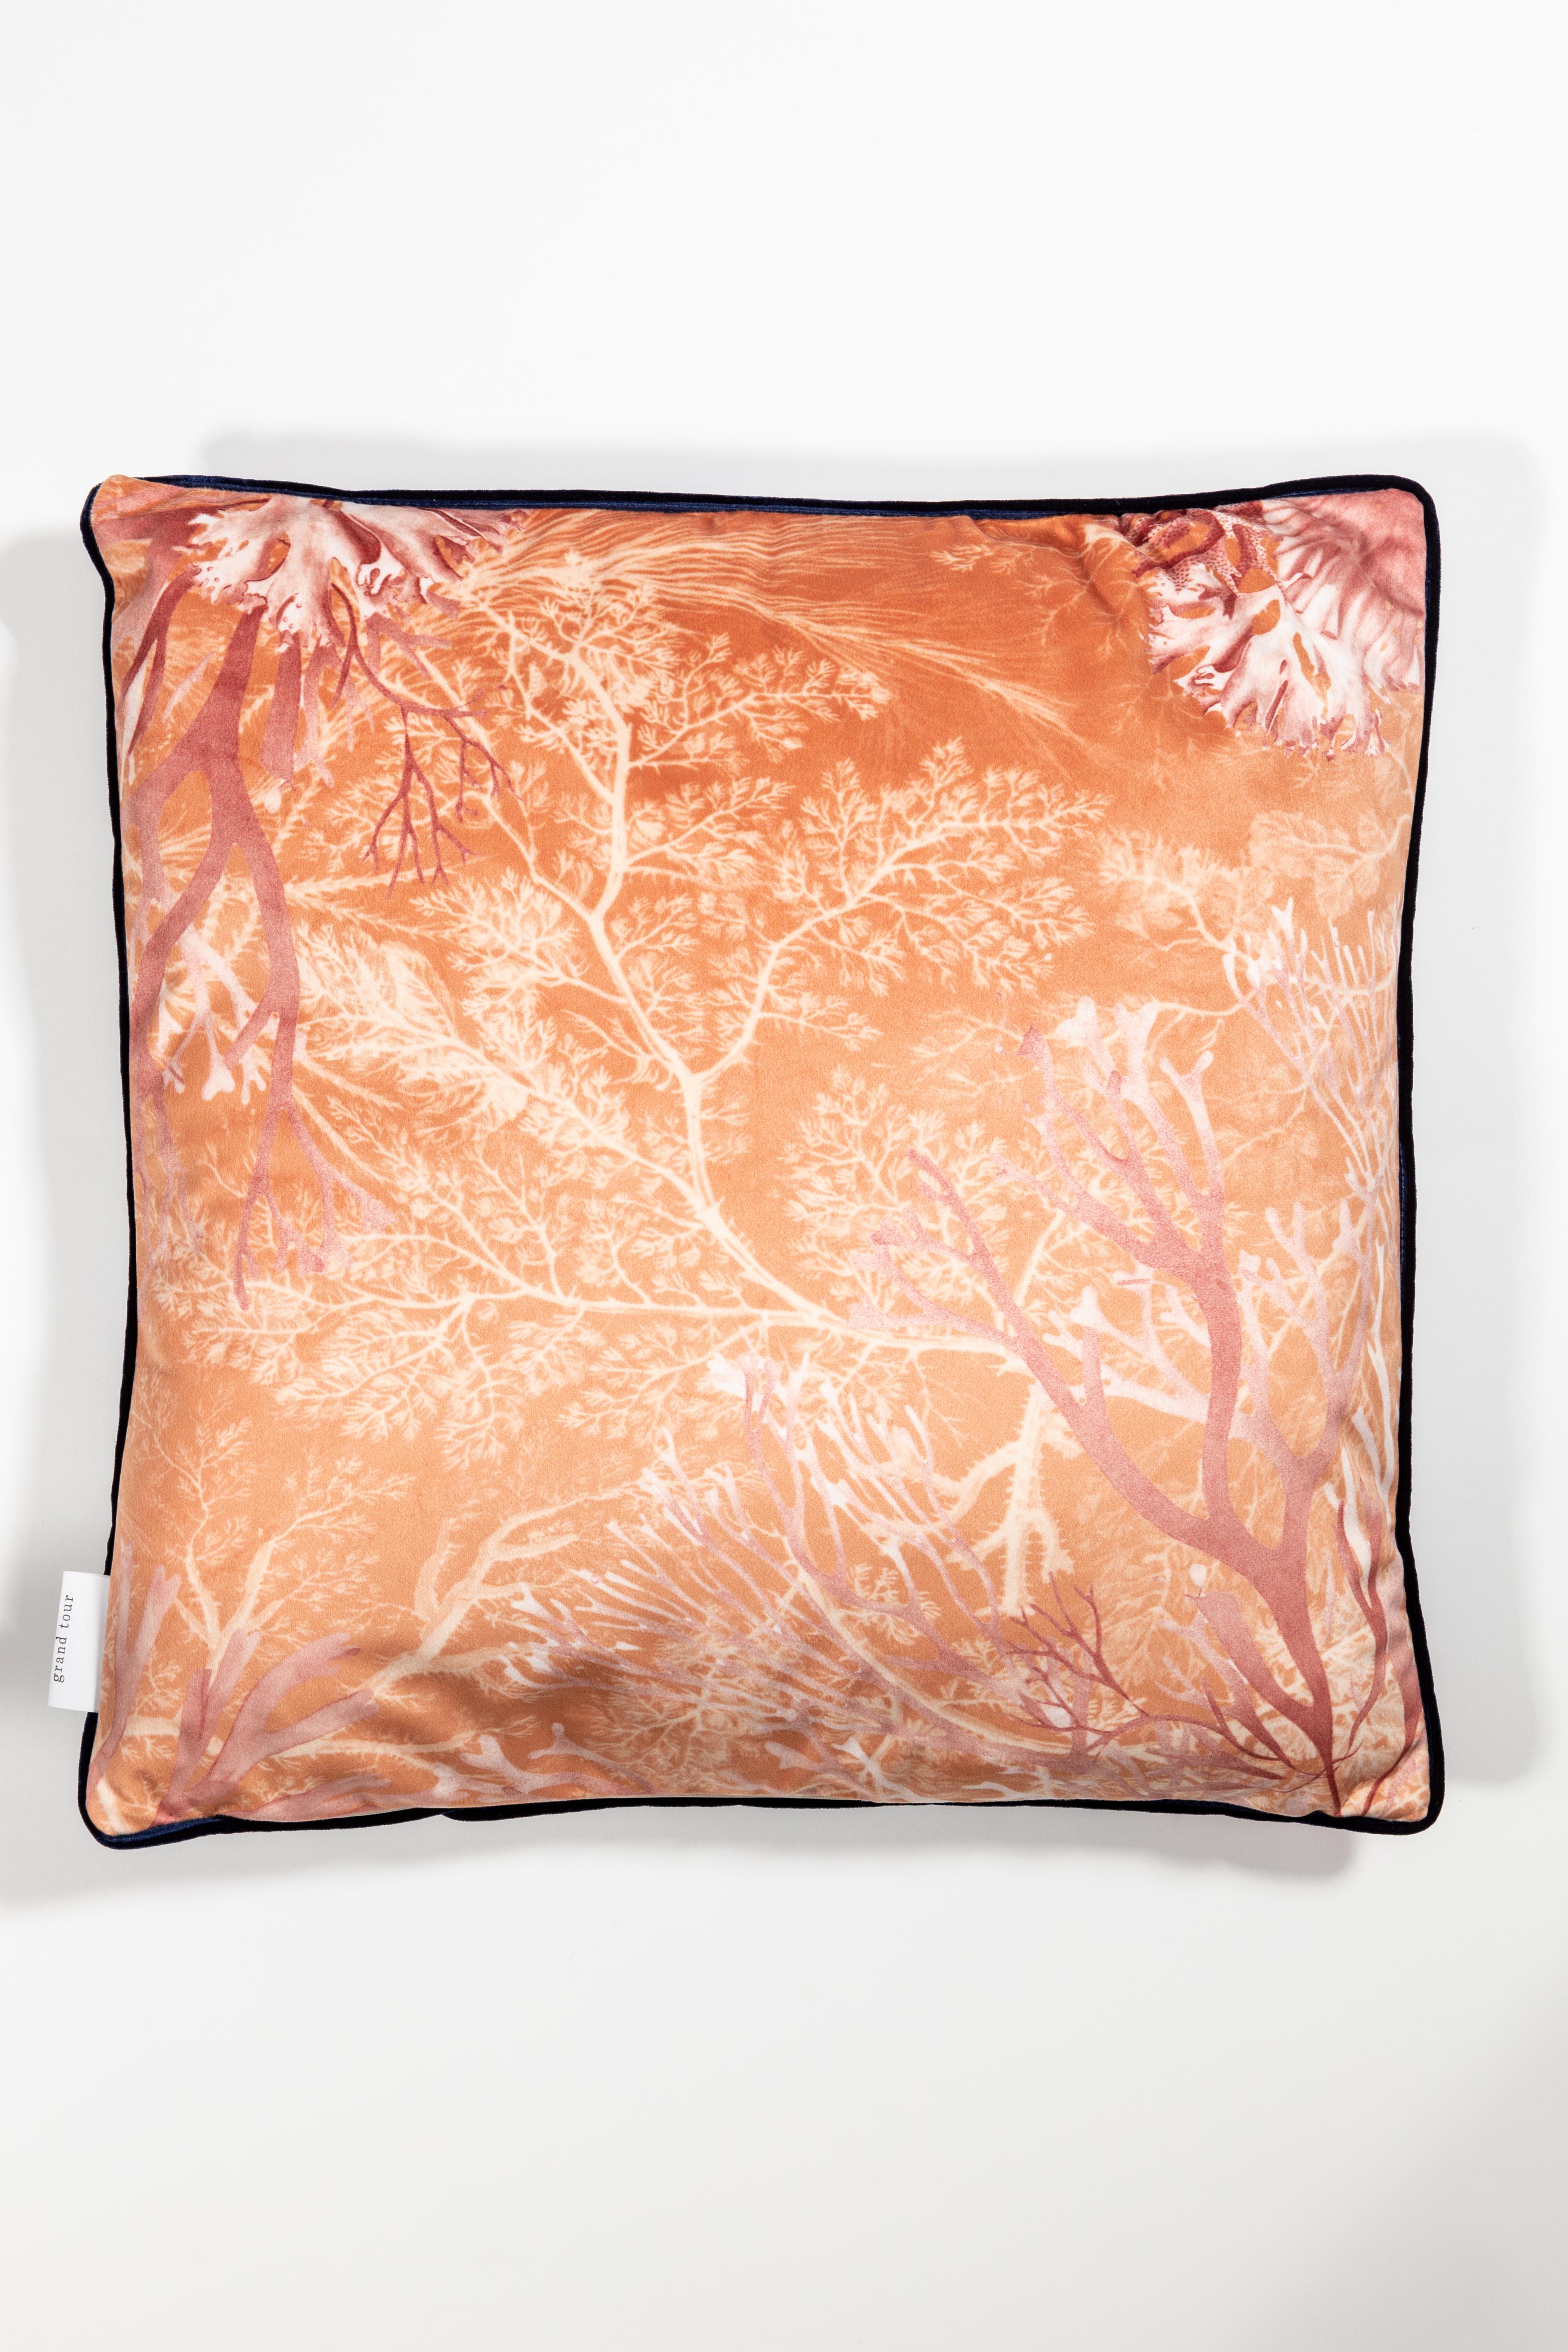 Amami, Contemporary Velvet Printed Pillow by Vito Nesta For Sale 4